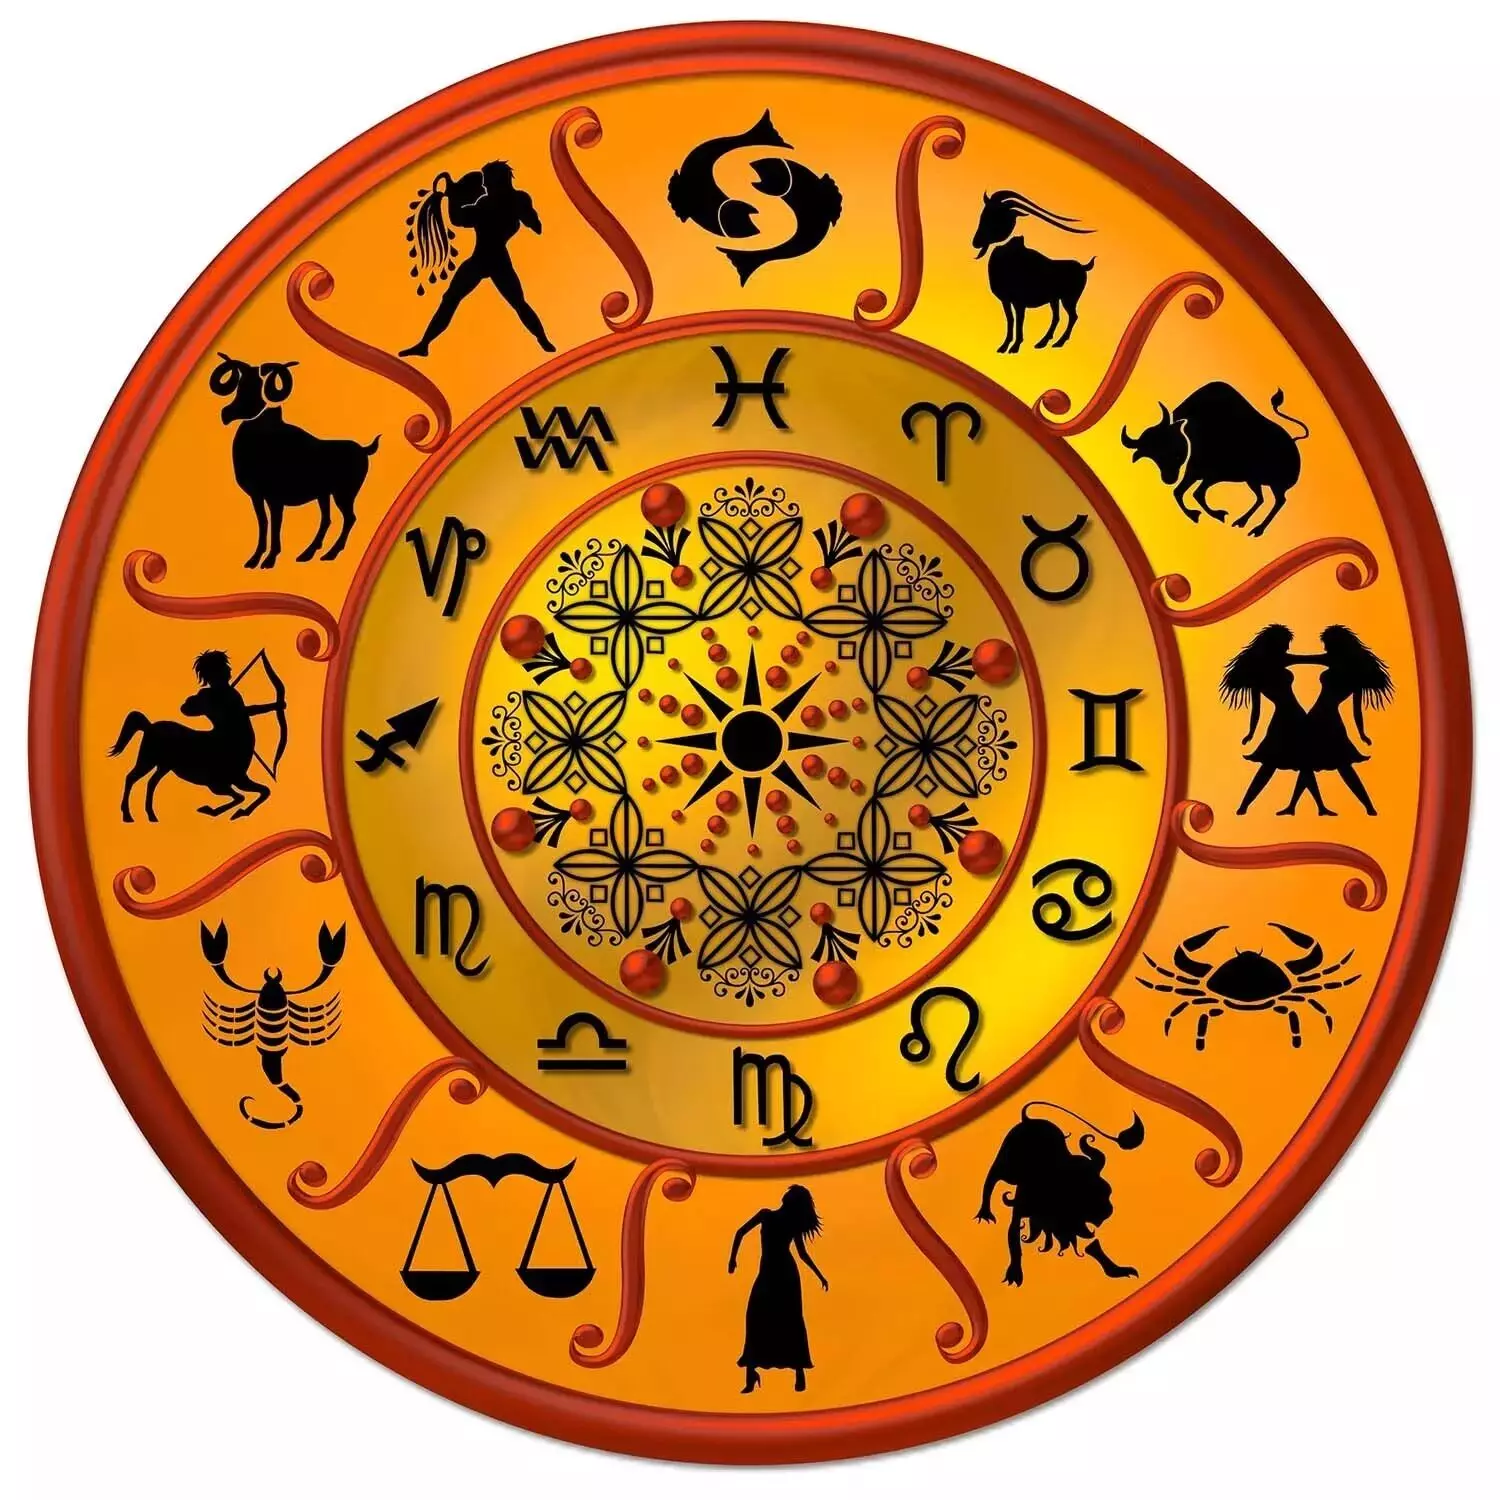 02  October  – Know your todays horoscope